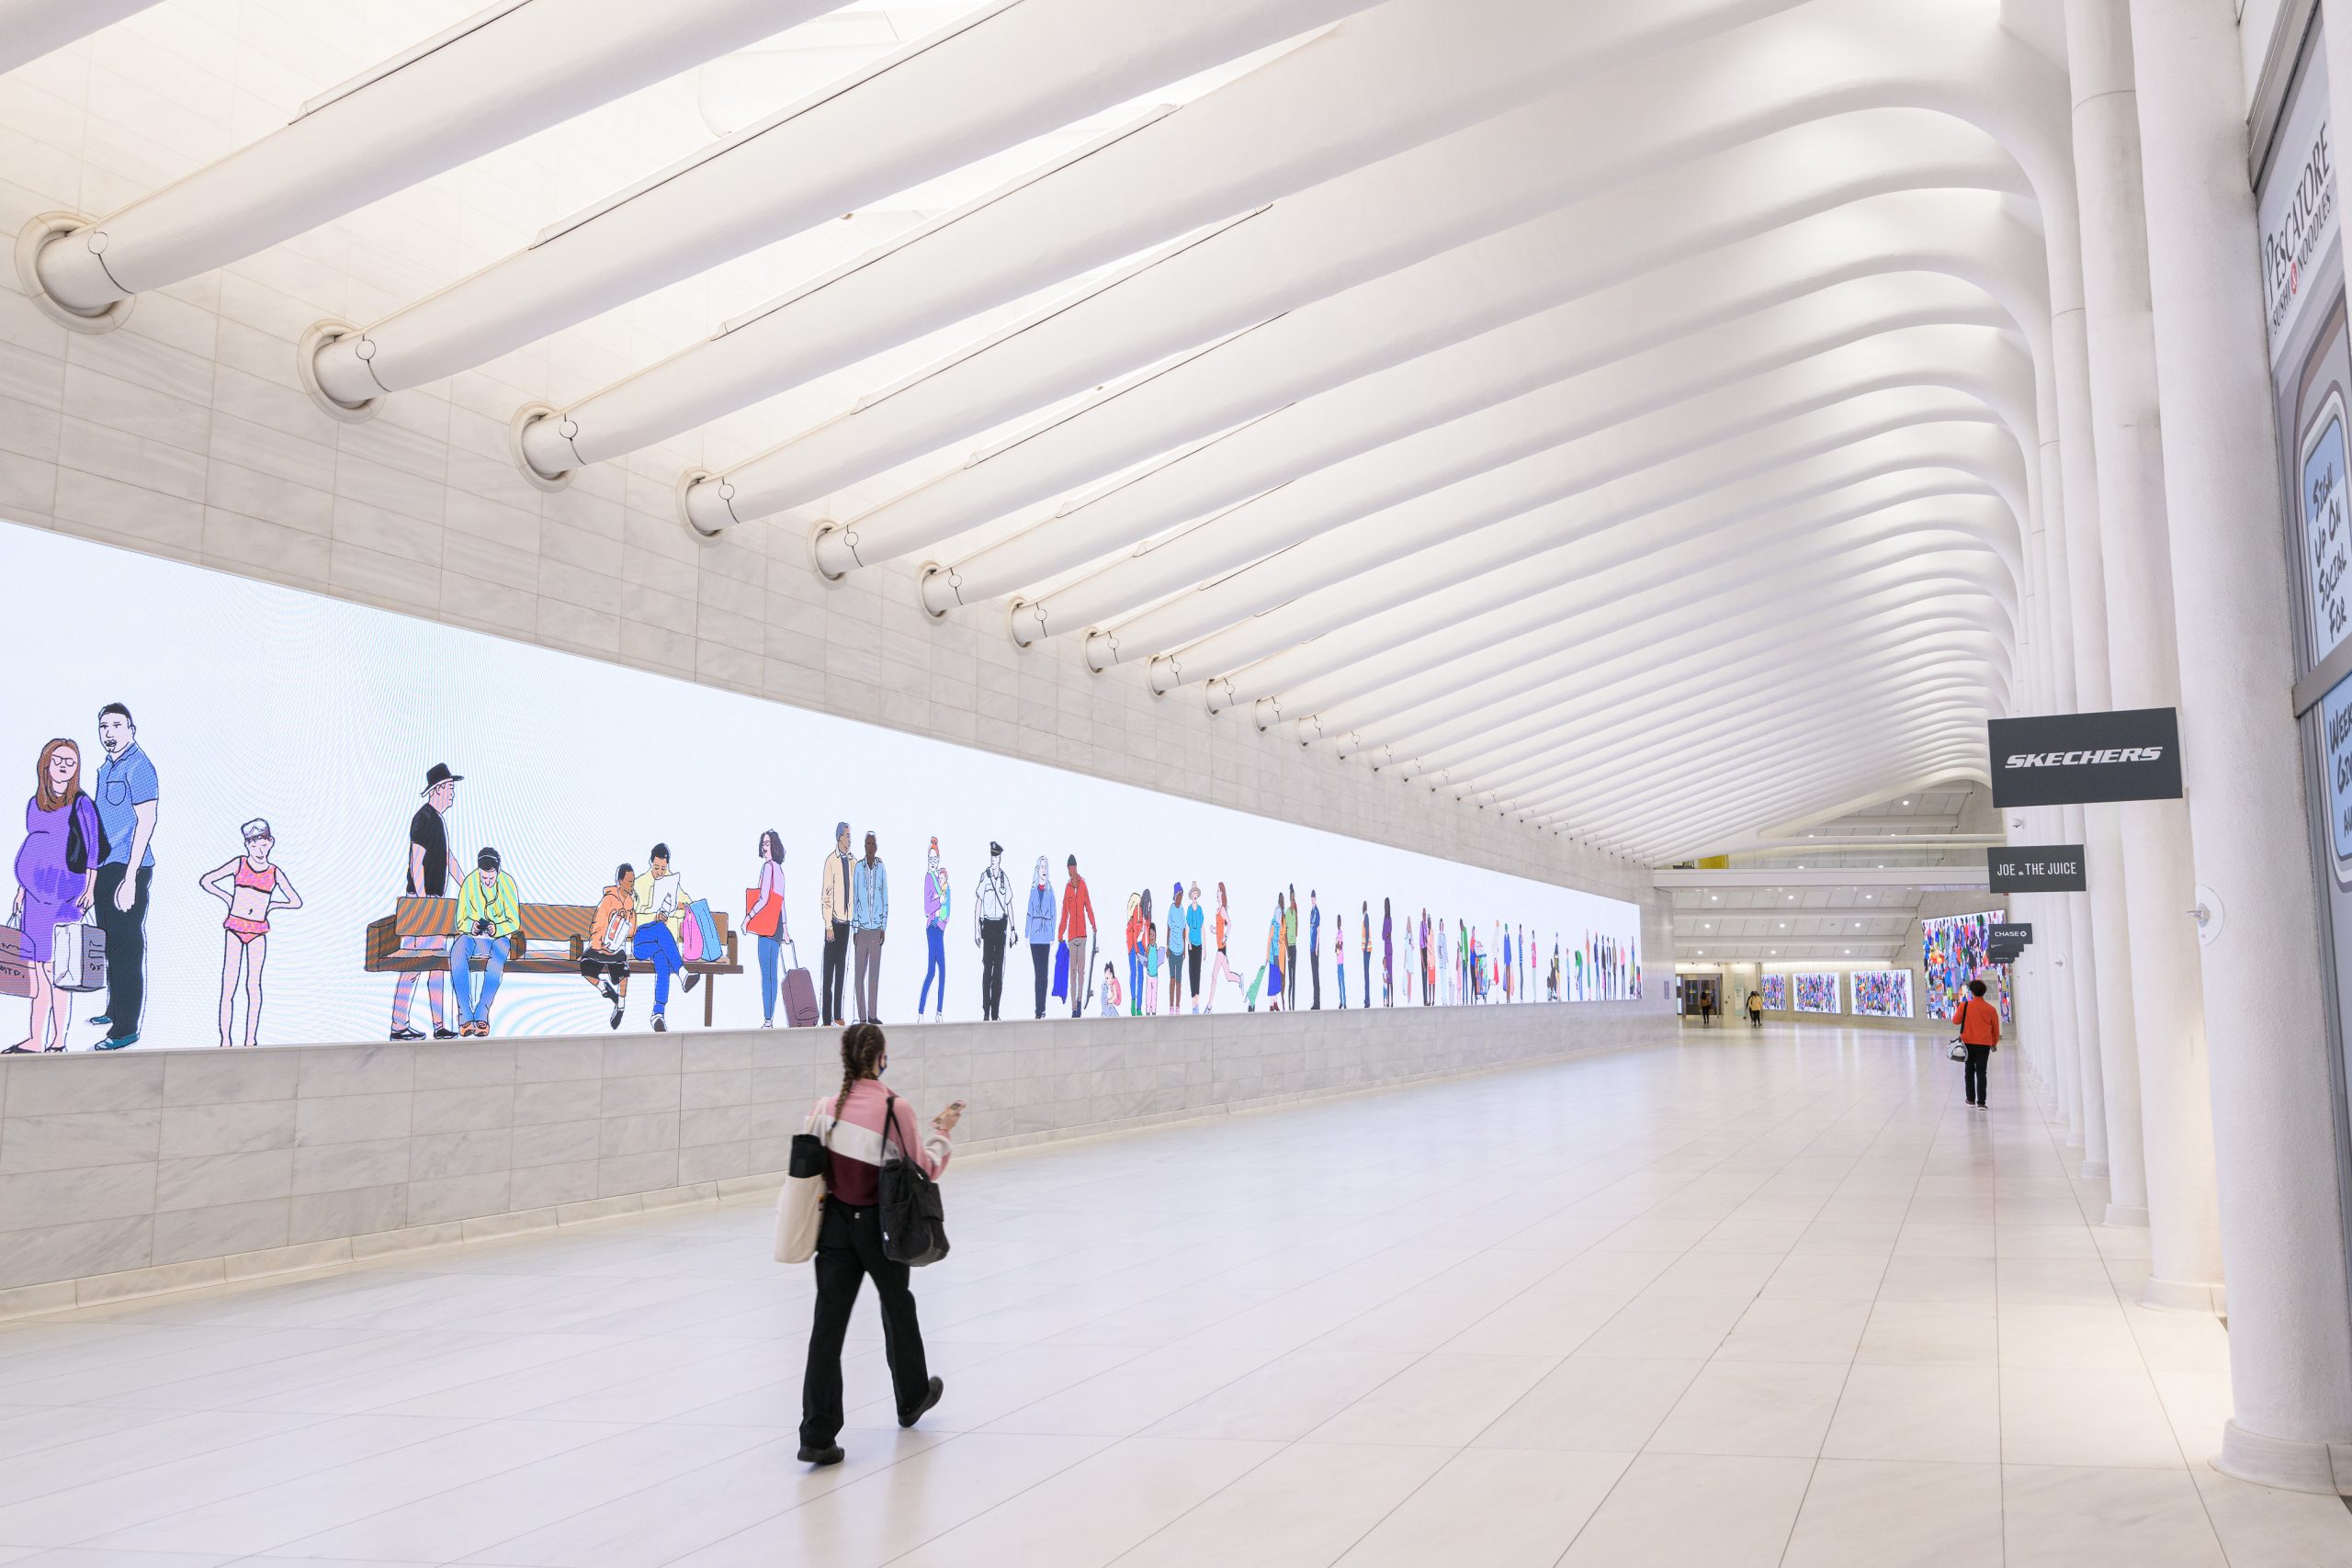 A person walks down a long, bright hallway with high ceilings in NYC's World Trade Center. To the left is a bright screen going down the length of the passageway featuring a colorful illustration created by Mona Chalabi for her project 100 New Yorkers.